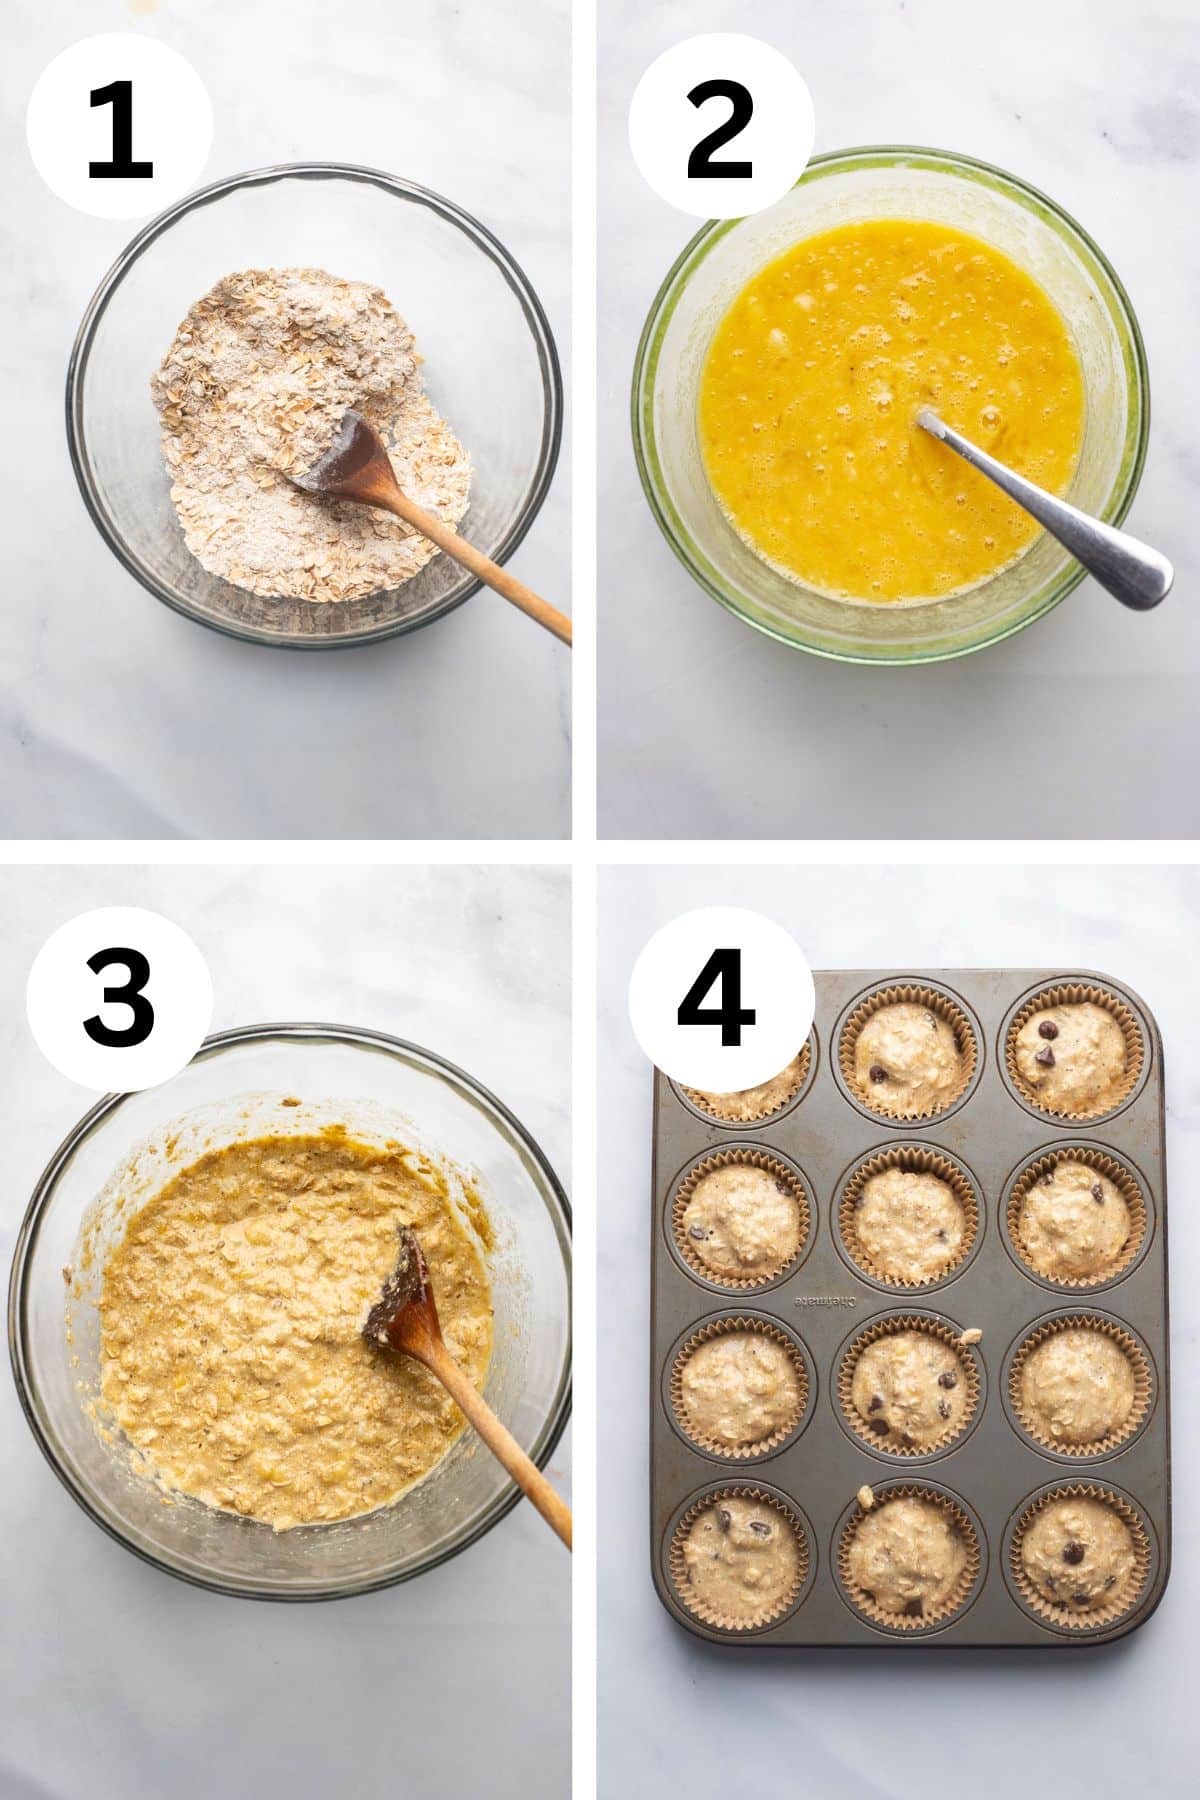 four images showing process of mixing ingredients and prepping banana muffins to bake